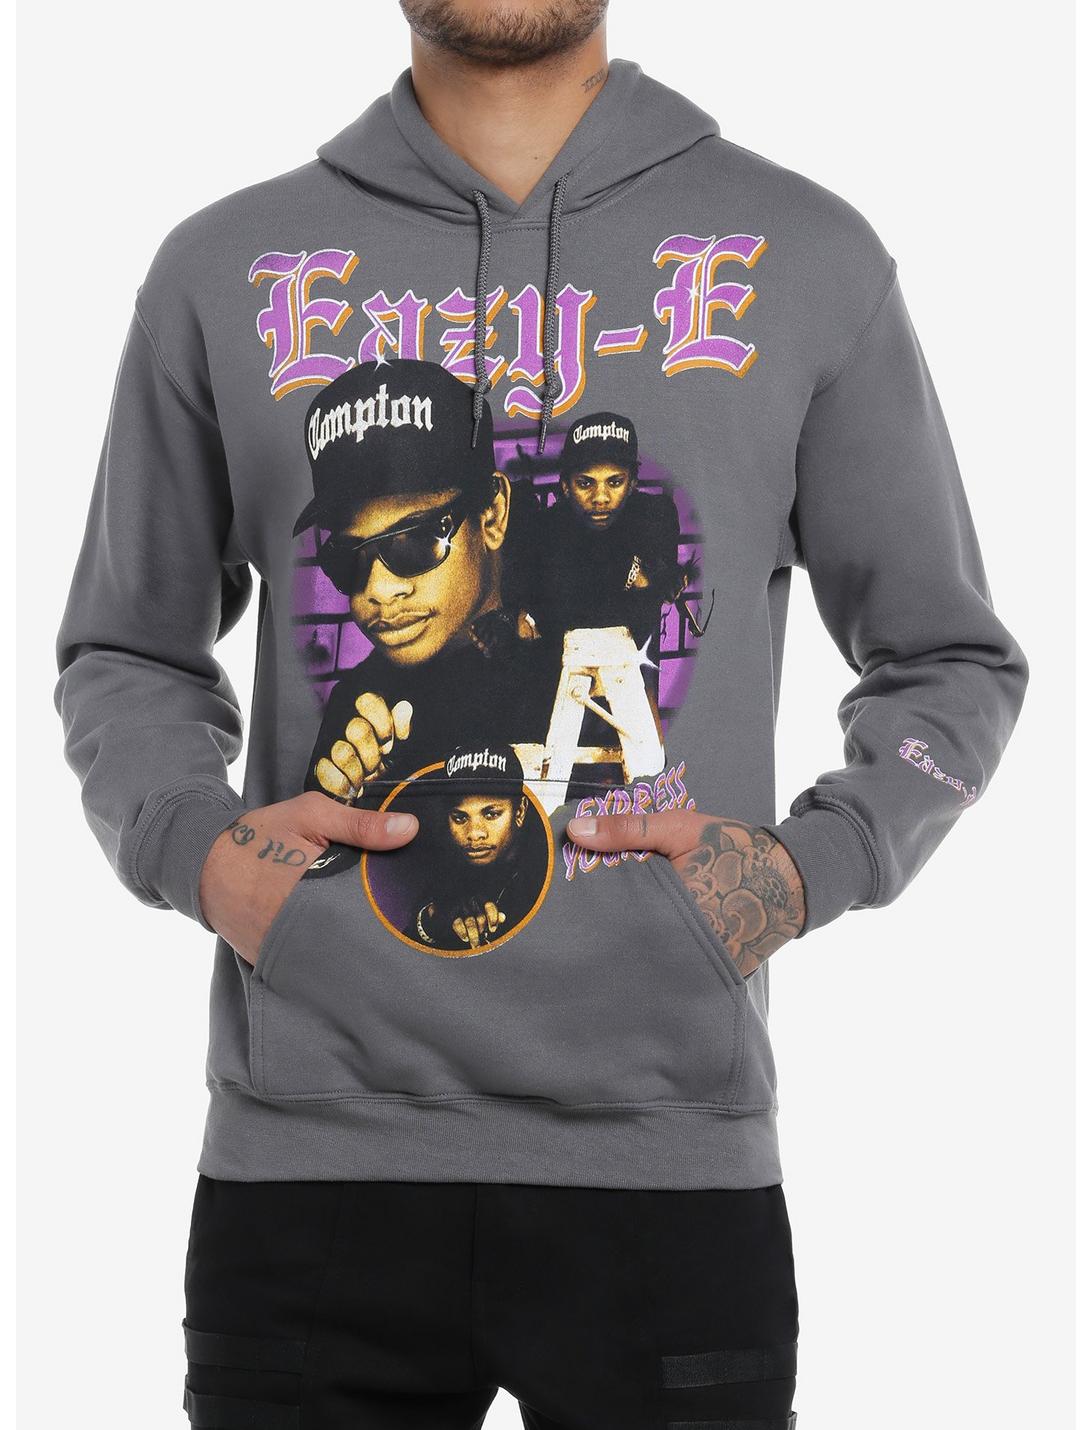 Eazy-E Express Yourself Hoodie, CHARCOAL, hi-res